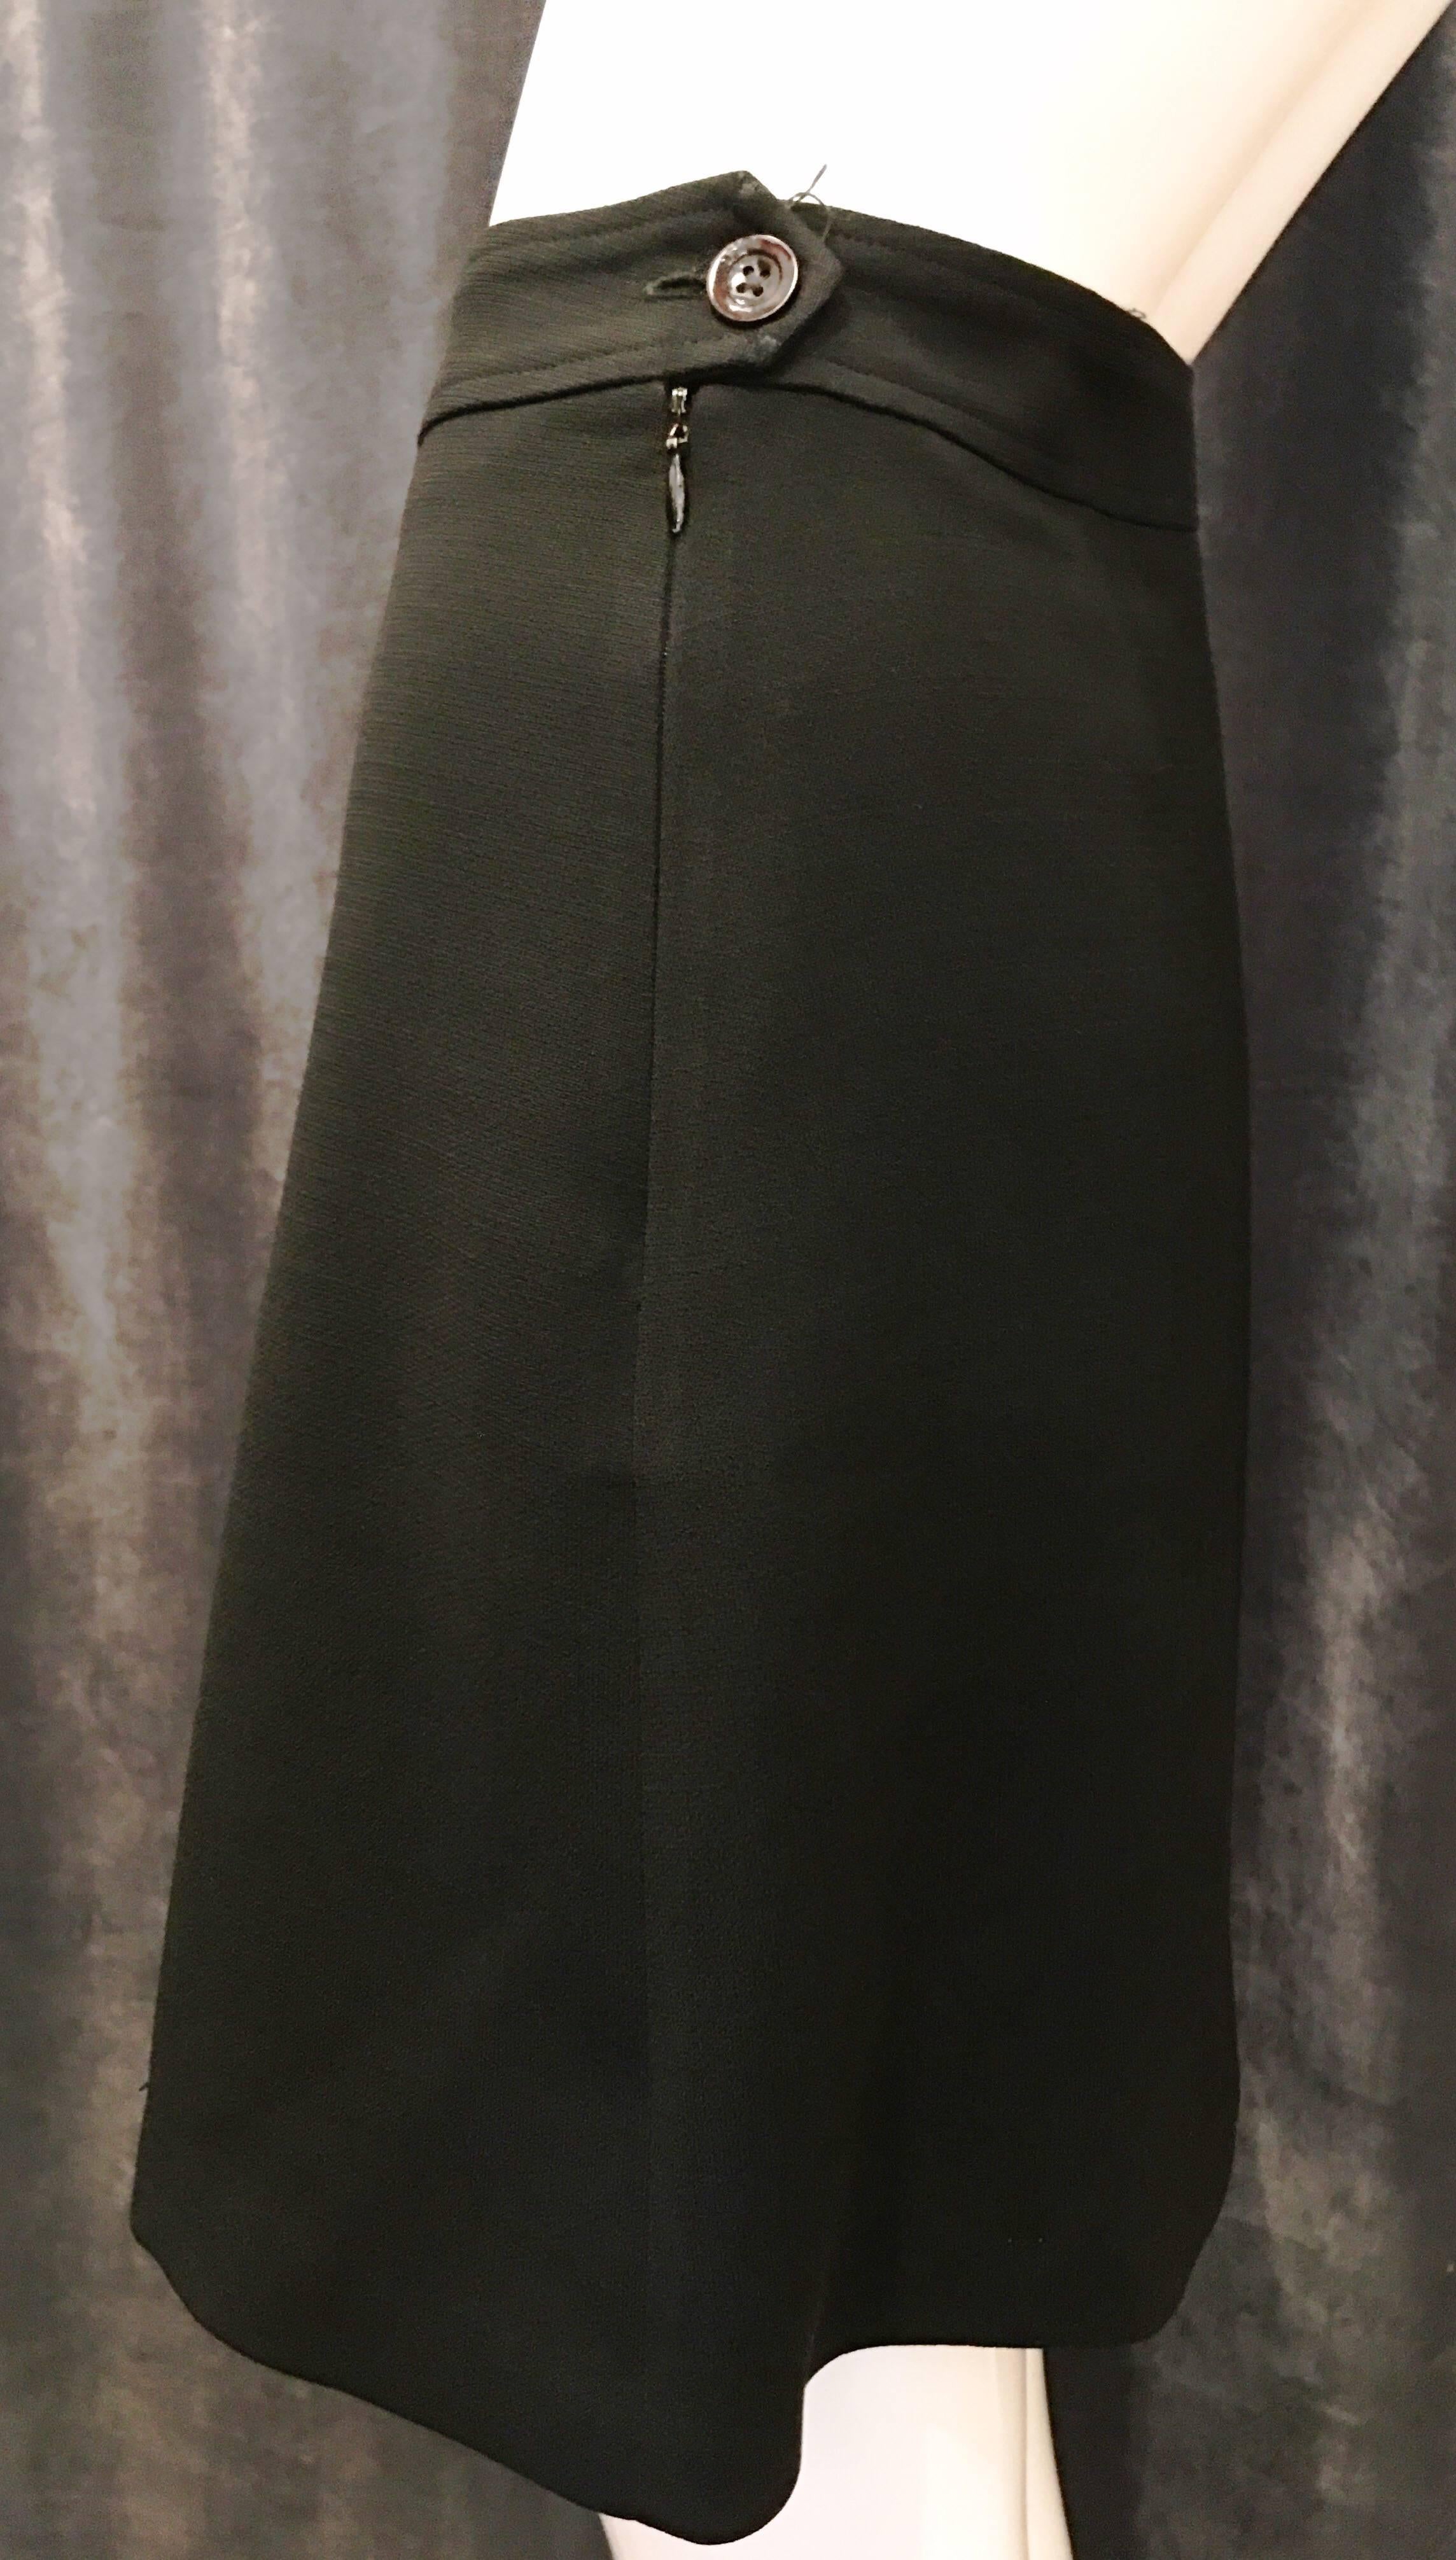 Black pleated mini skirt with single button and zip closure at left side of the garment. Wool. Fully lined. A classic piece that you will be able to pair with anything. Wear with brightly colored tights boots and a cropped top or wool tights and